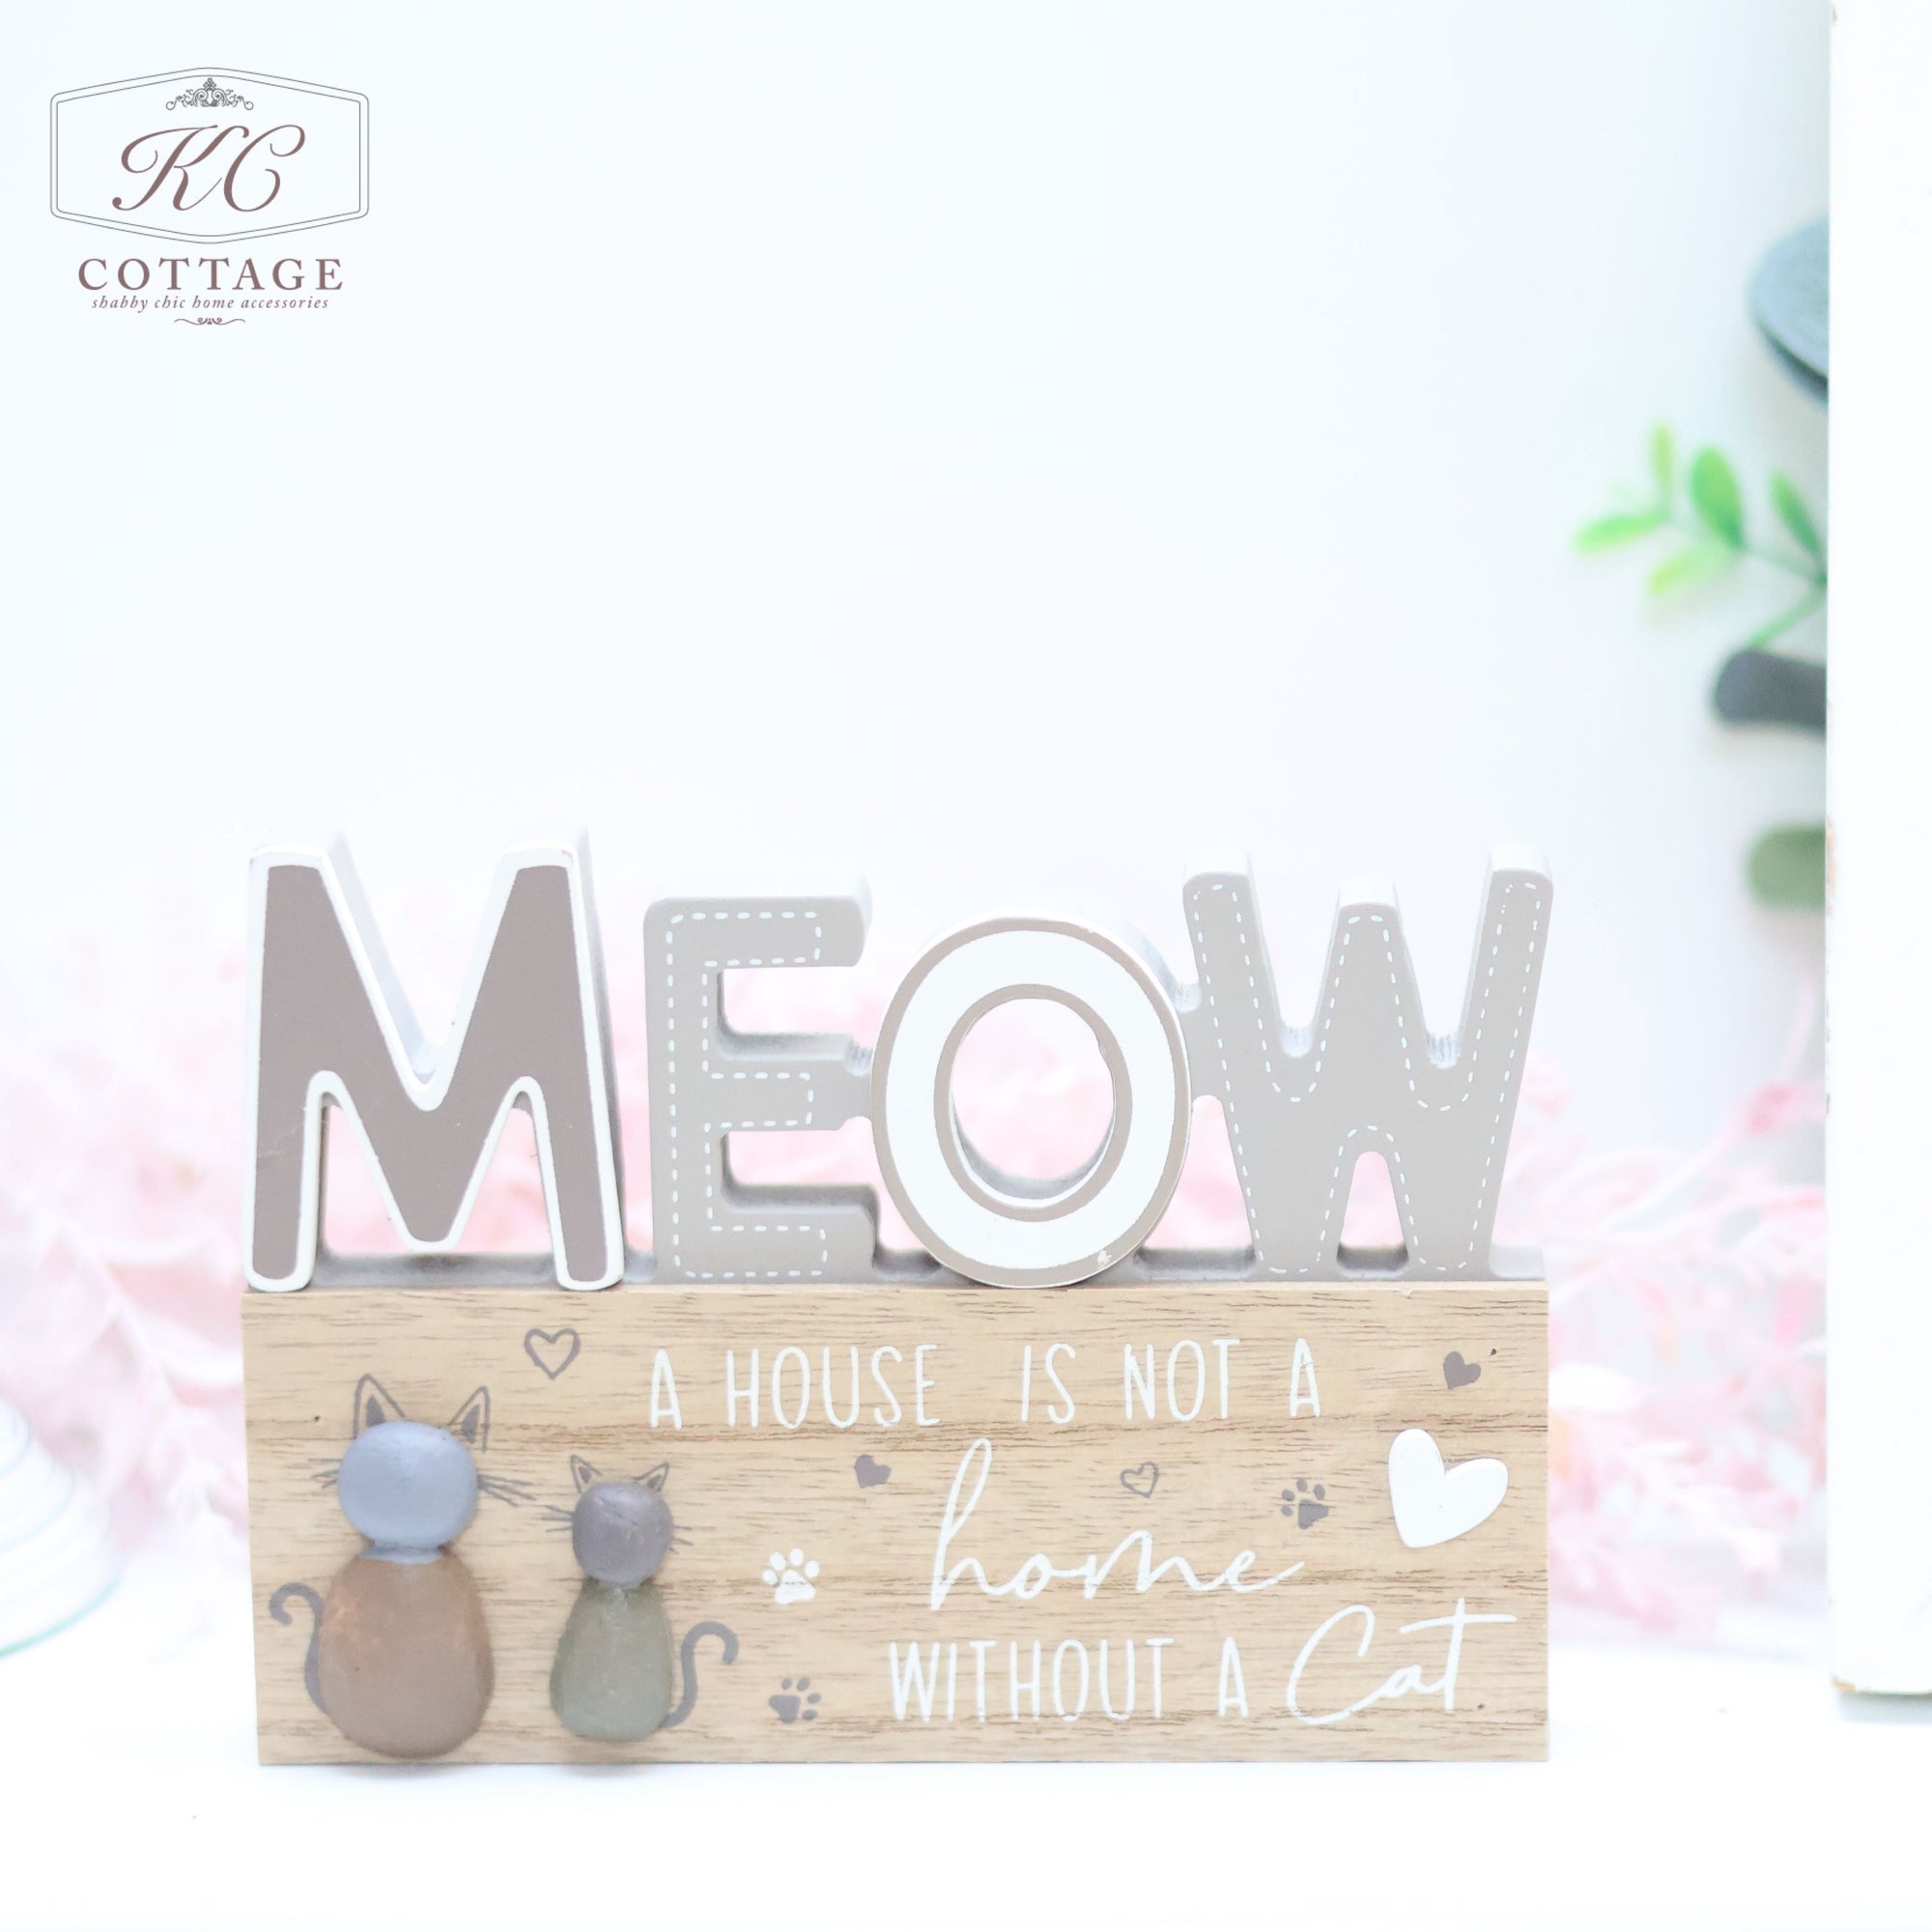 The Cat Pebble Signs features a charming decorative wooden block with the word "MEOW" prominently displayed on top. Below, it reads, "A HOUSE IS NOT A home WITHOUT A Cat." Two adorable cat figurines are affixed to the front. The background is softly blurred with hints of greenery, making it an ideal addition to any cat lover's home.